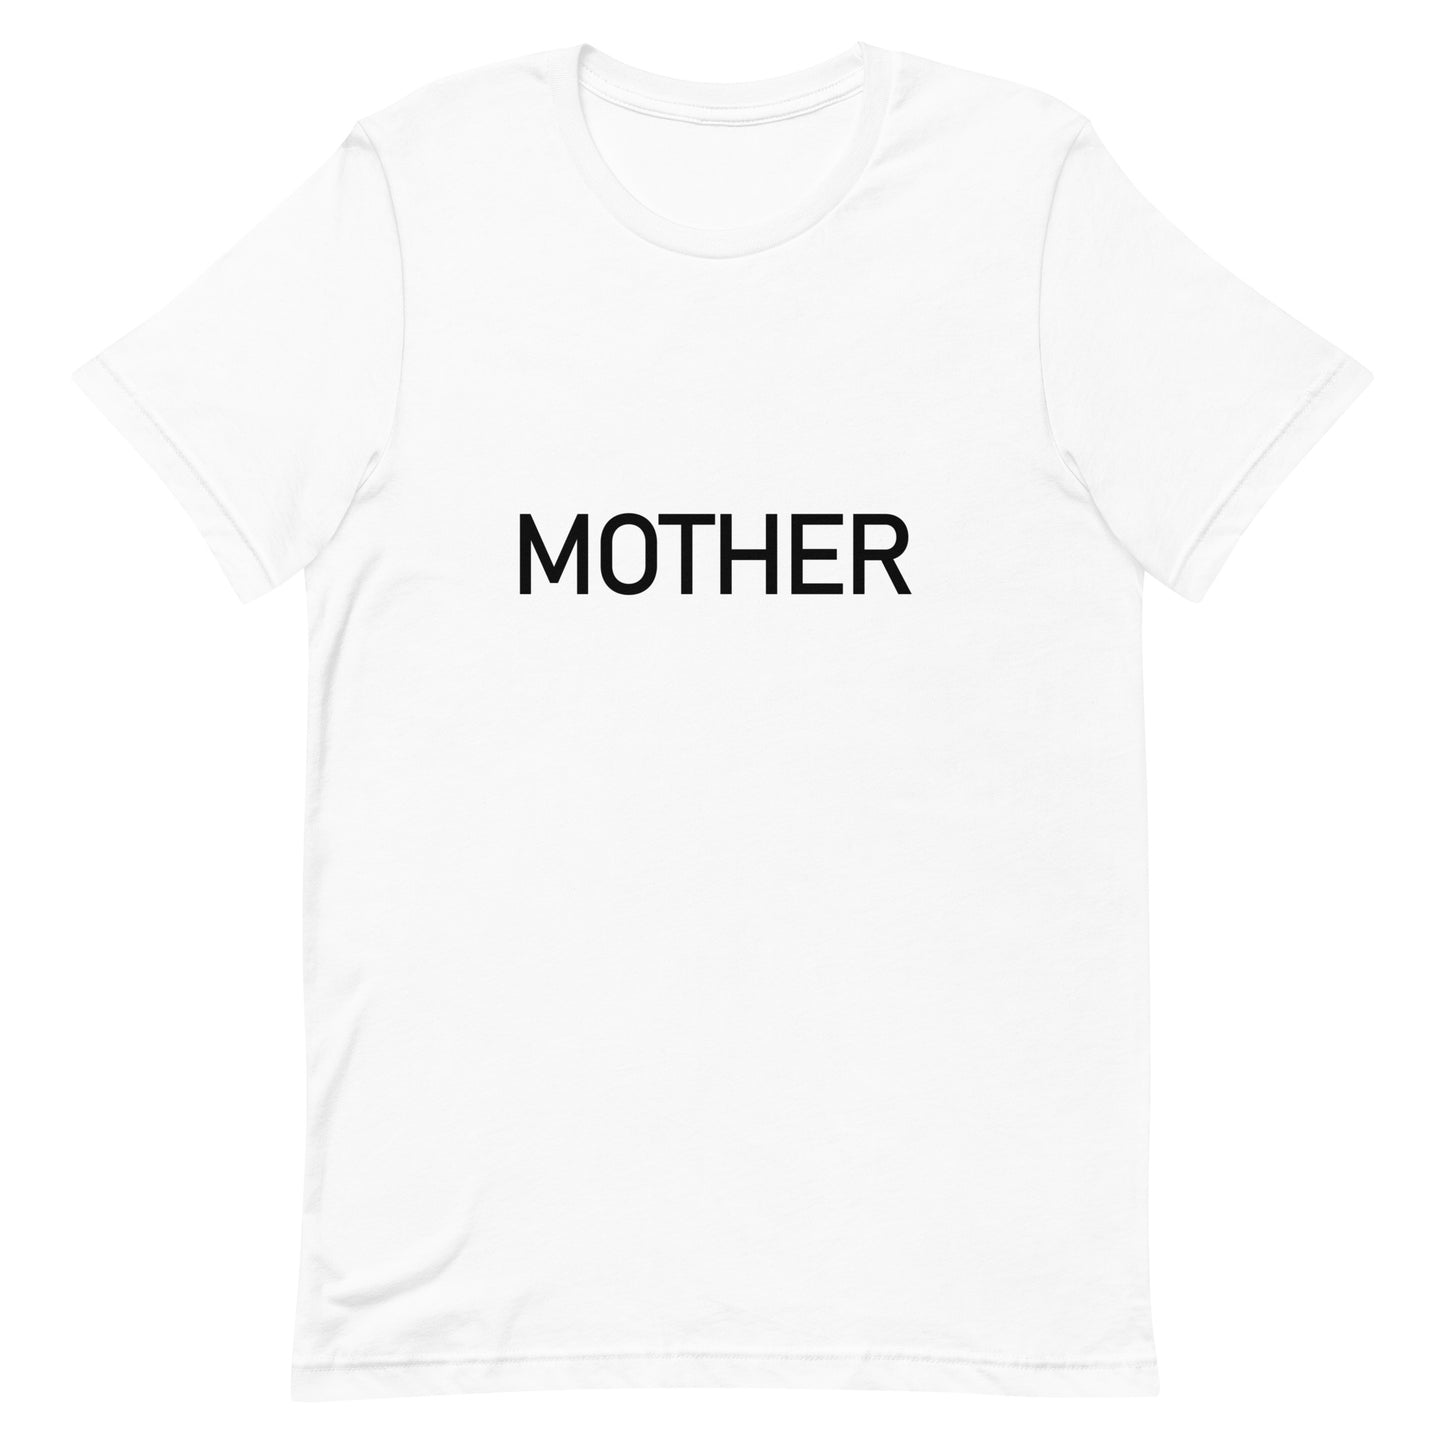 Mother Black - Sustainably Made Women’s Short Sleeve Tee